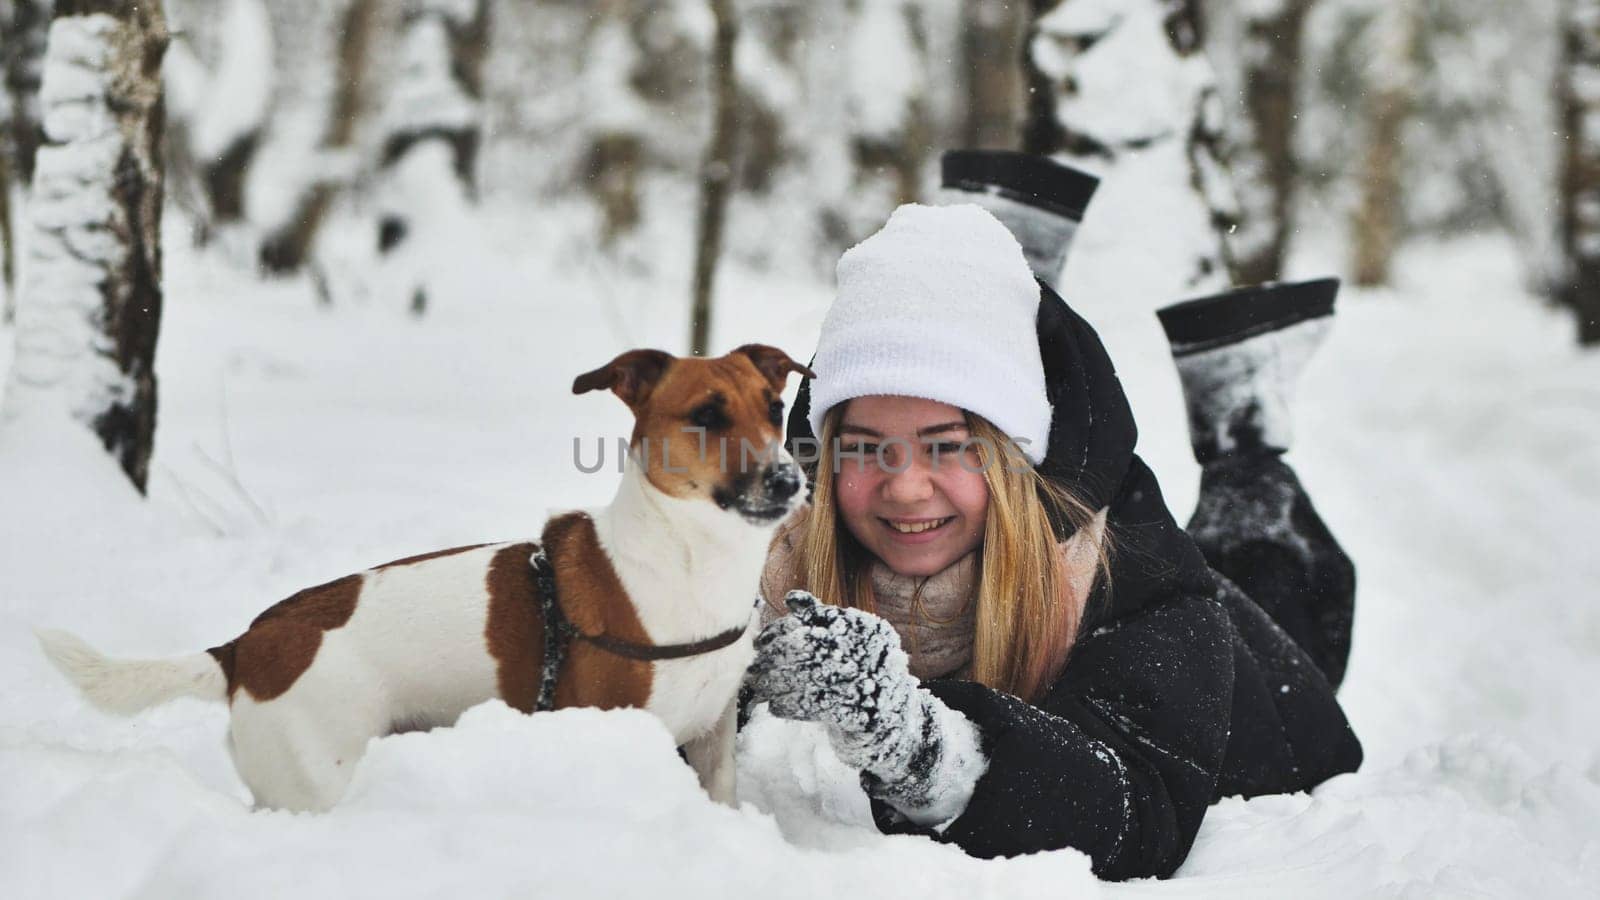 A girl playing with her Jack Russell Terrier dog in the snow